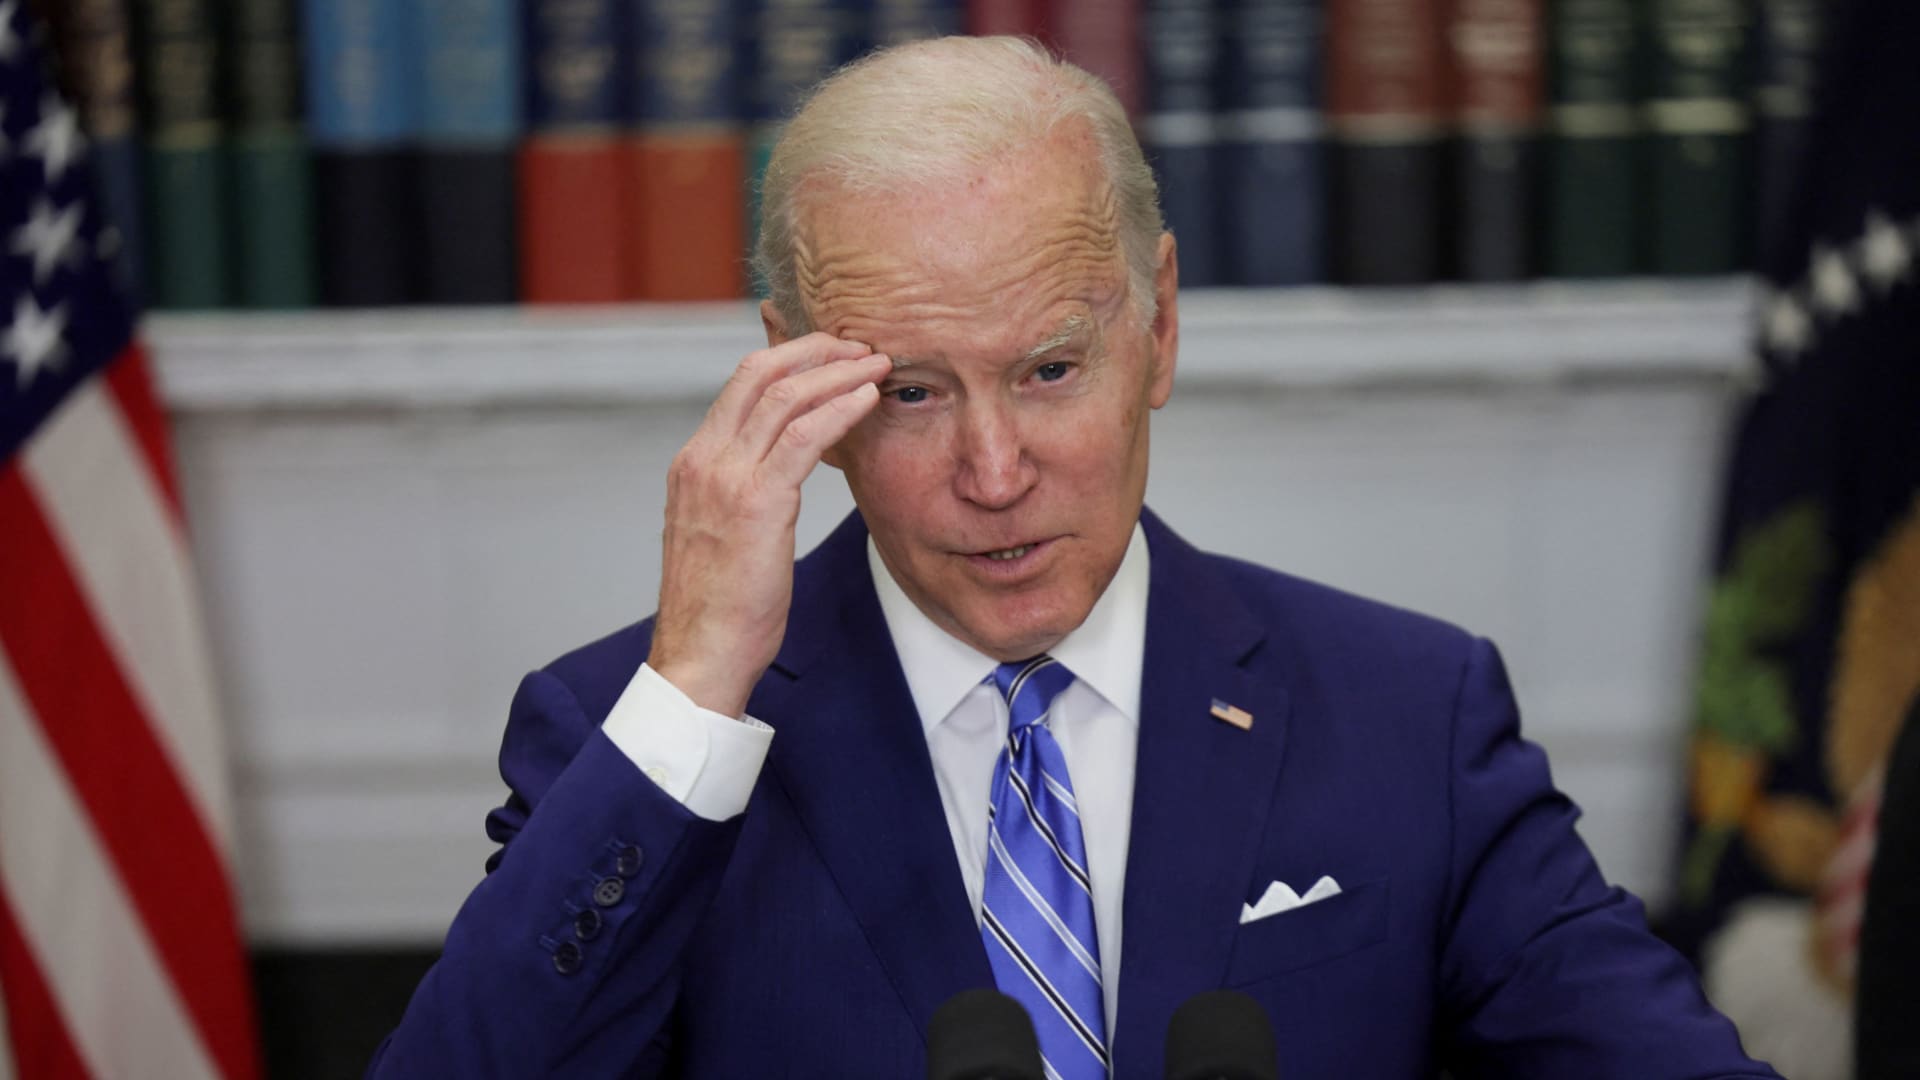 For Biden’s ratings to go up, it’s obvious what needs to go down